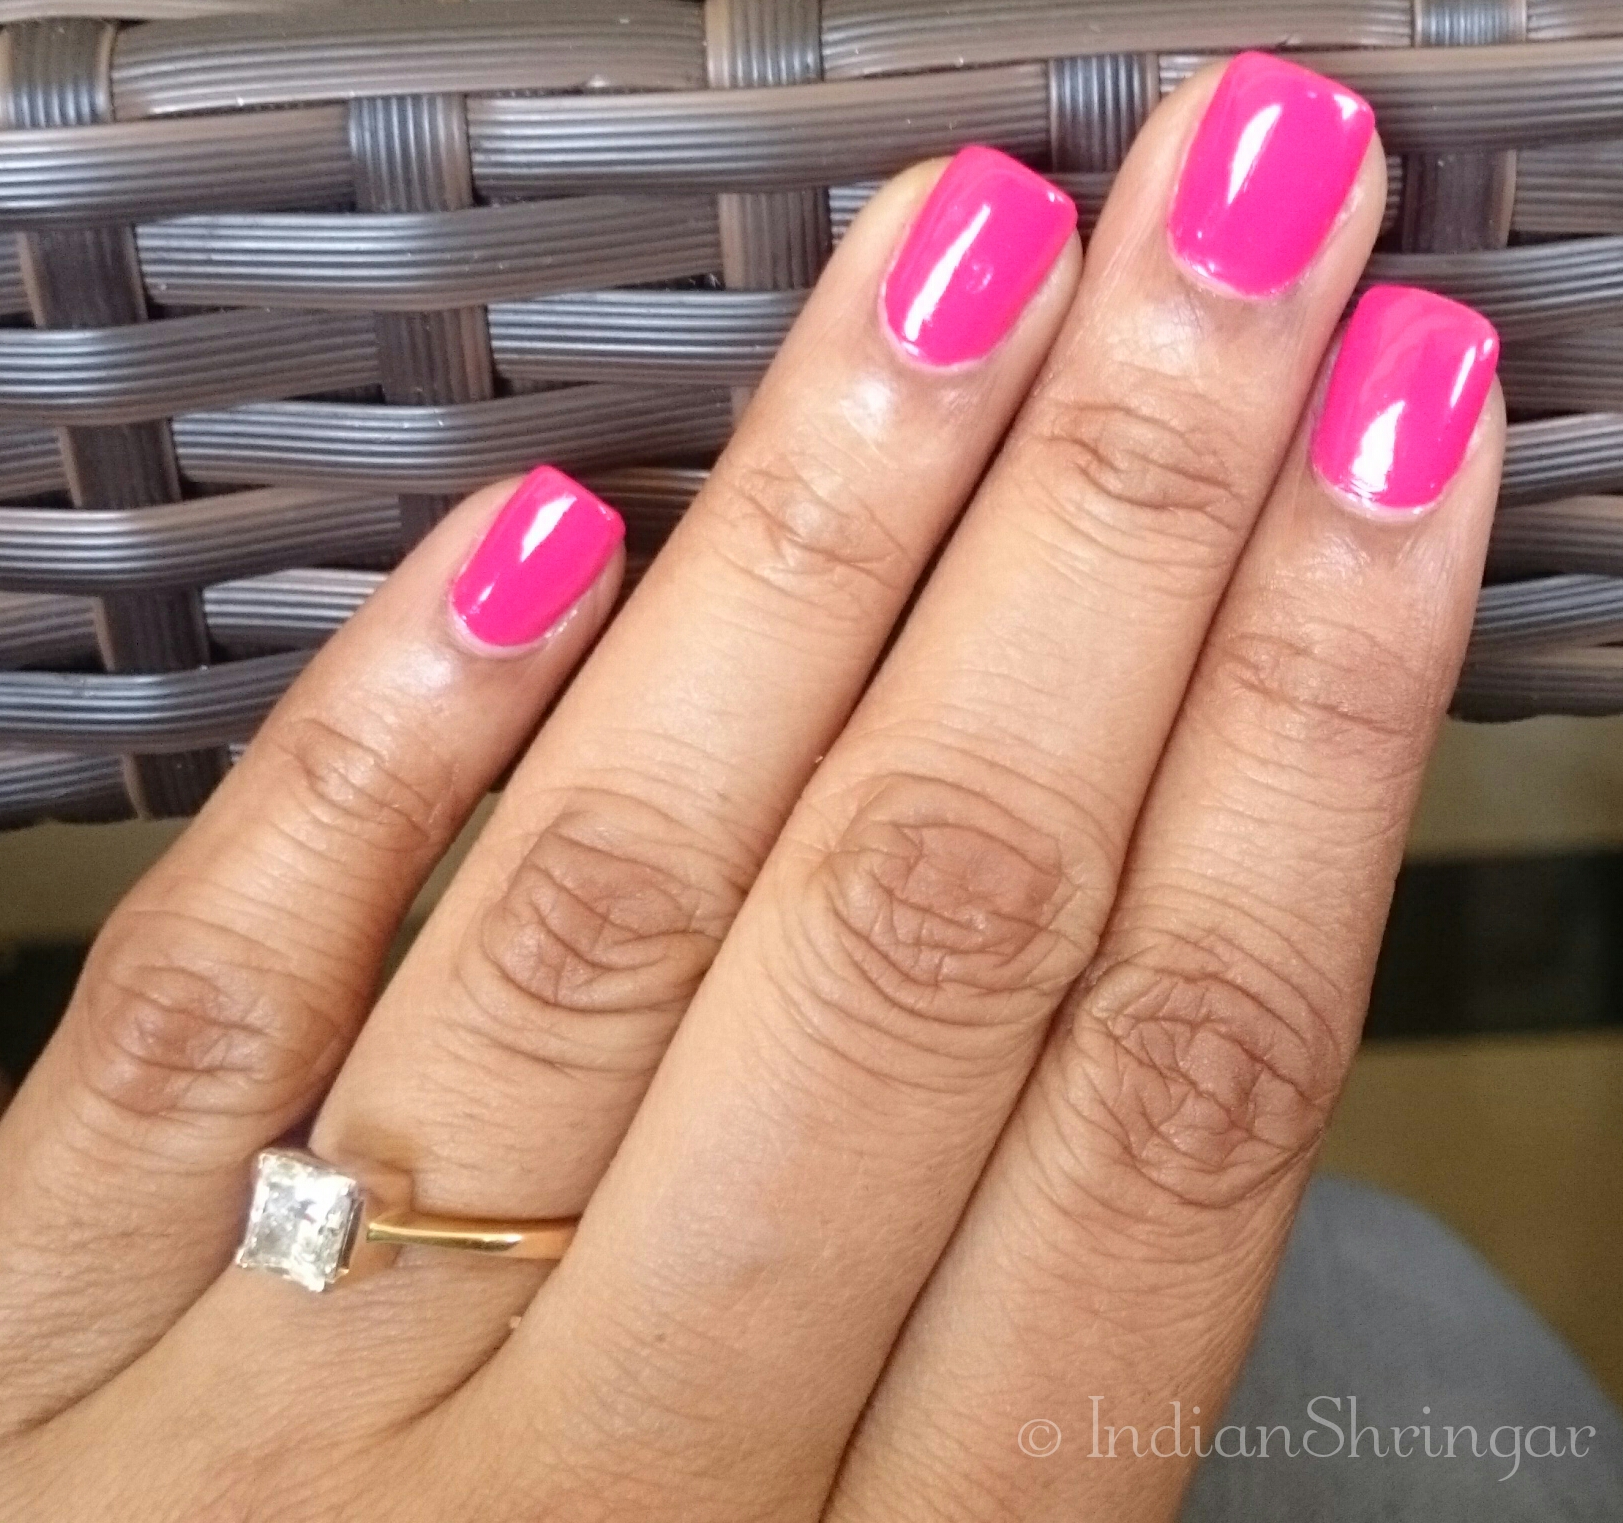 Gel nails manicure - procedure, pros and cons